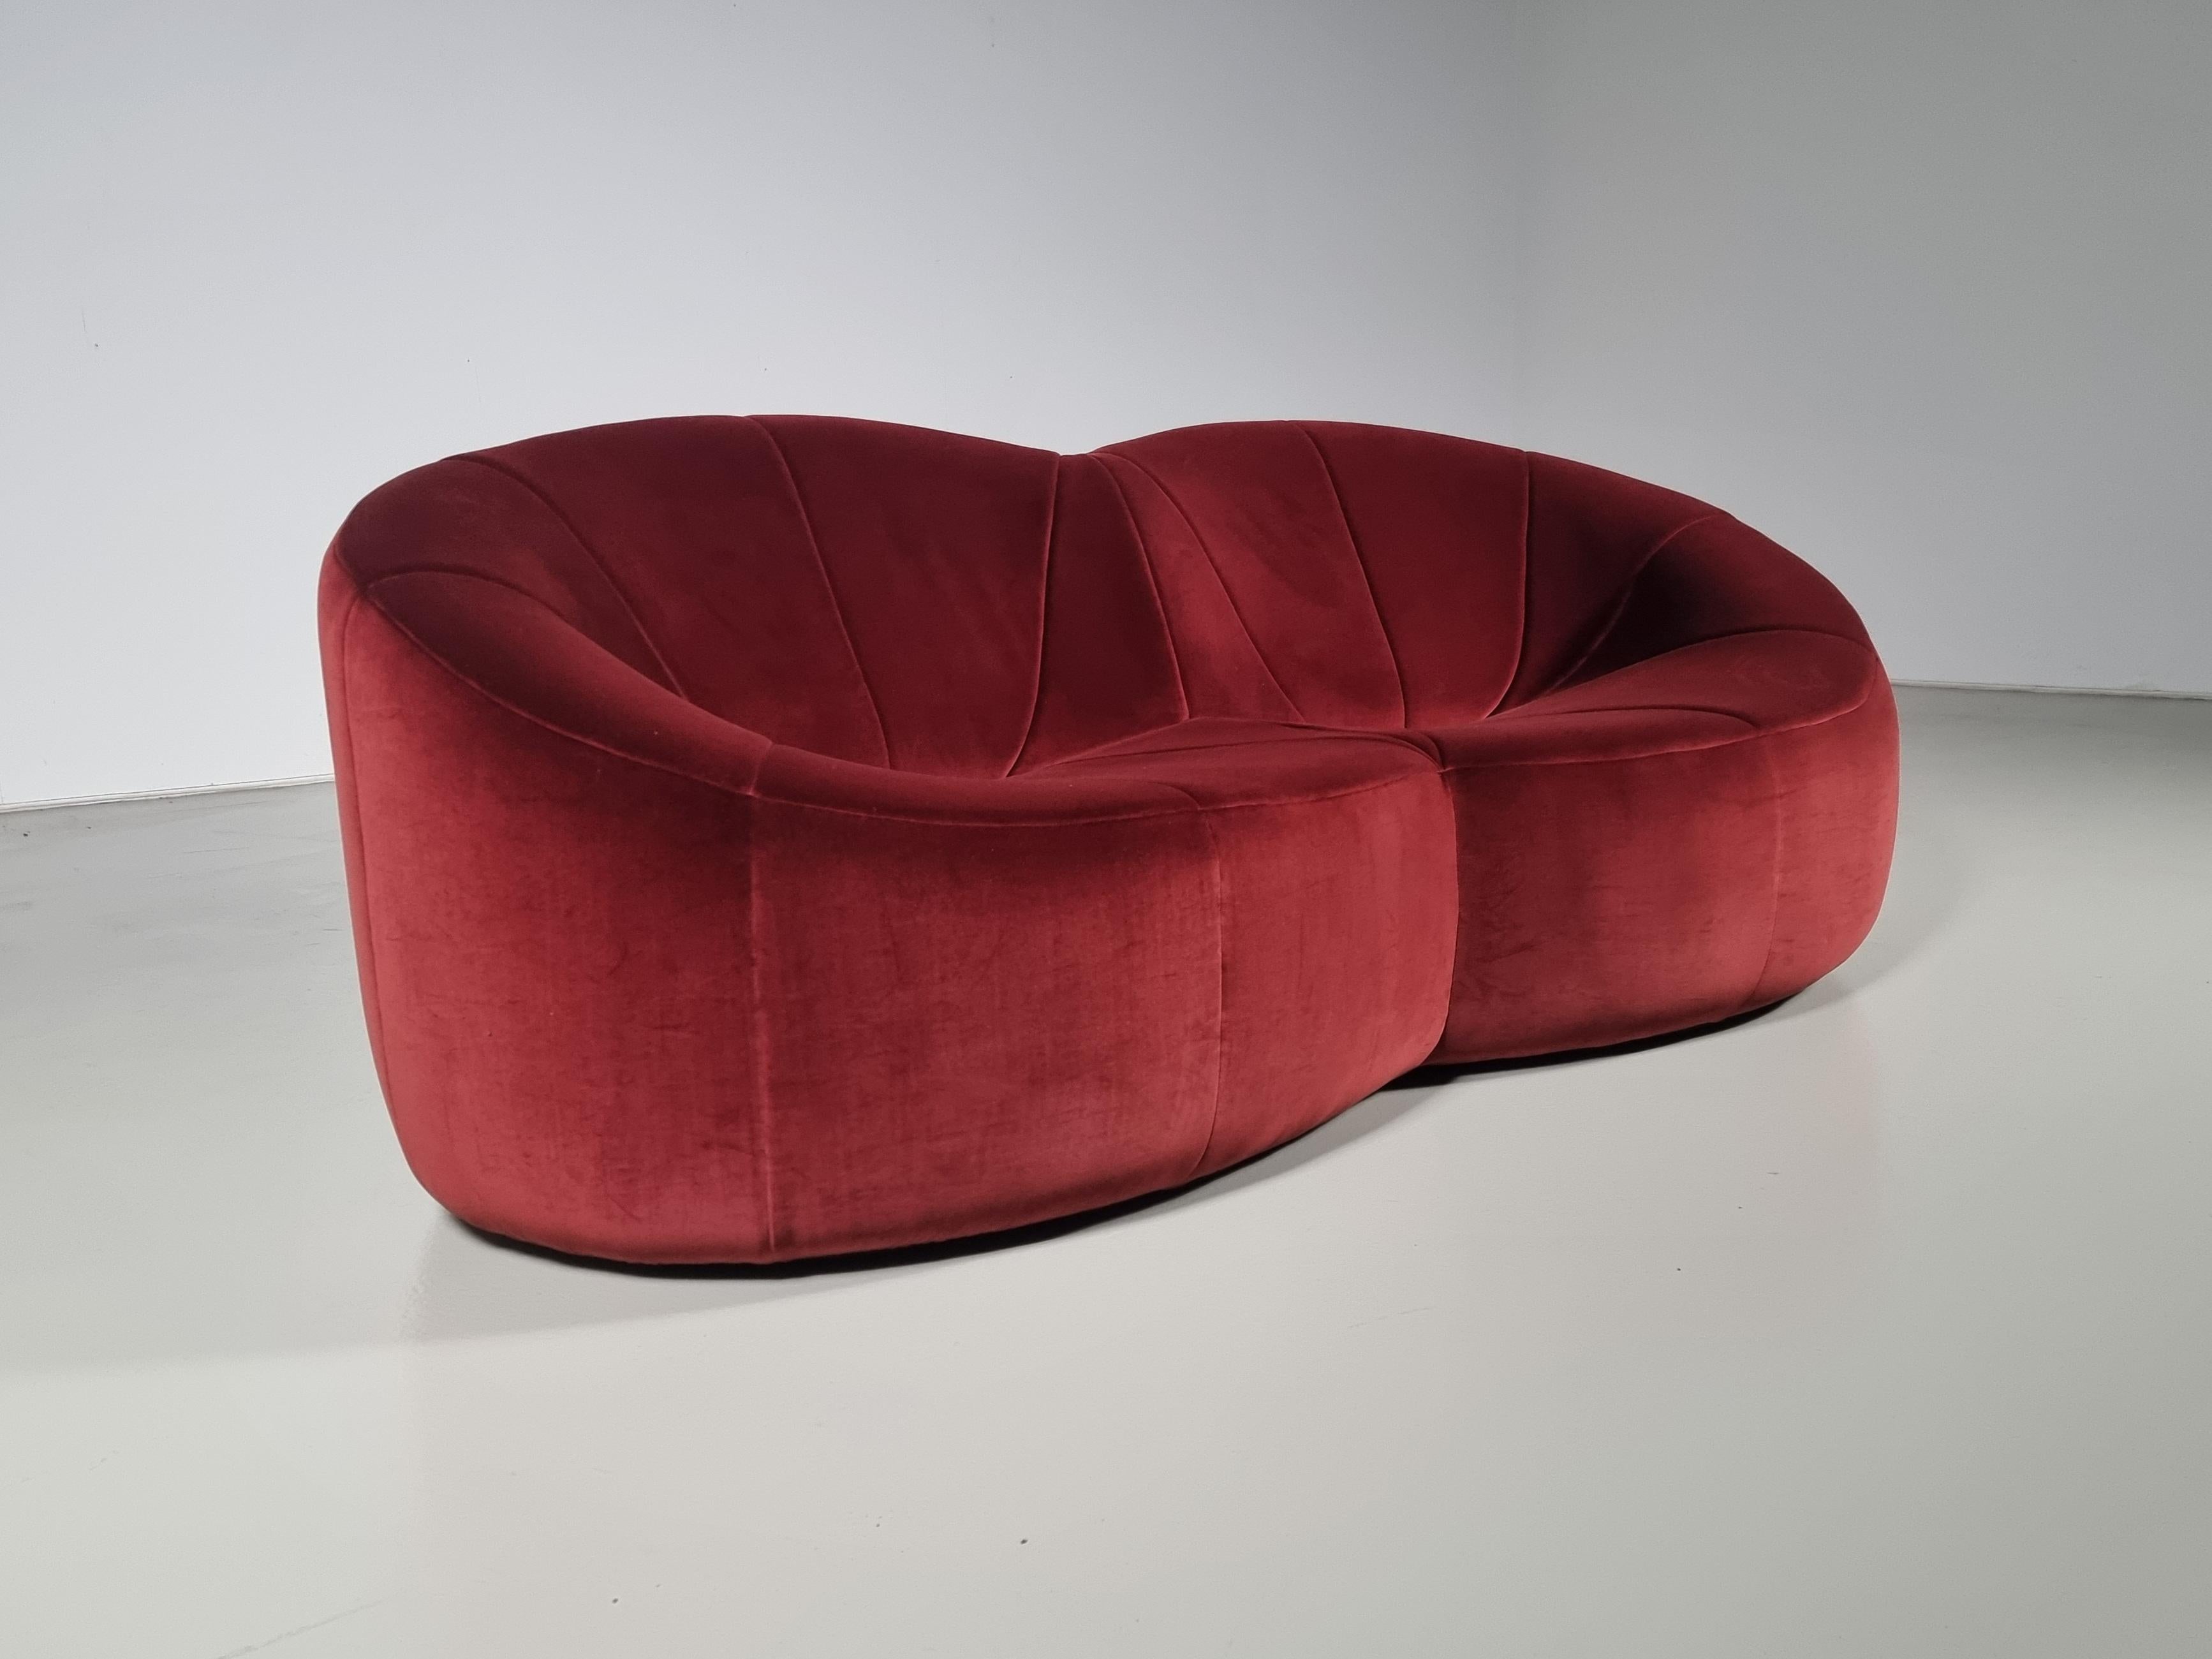 Pumpkin 2-seater sofa designed by Pierre Paulin for Ligne Roset, France, 2008. Reupholstered in a high-quality cotton velvet by Dedar Milano. A unique sofa. The first edition of this sofa was designed for the private collection of former French